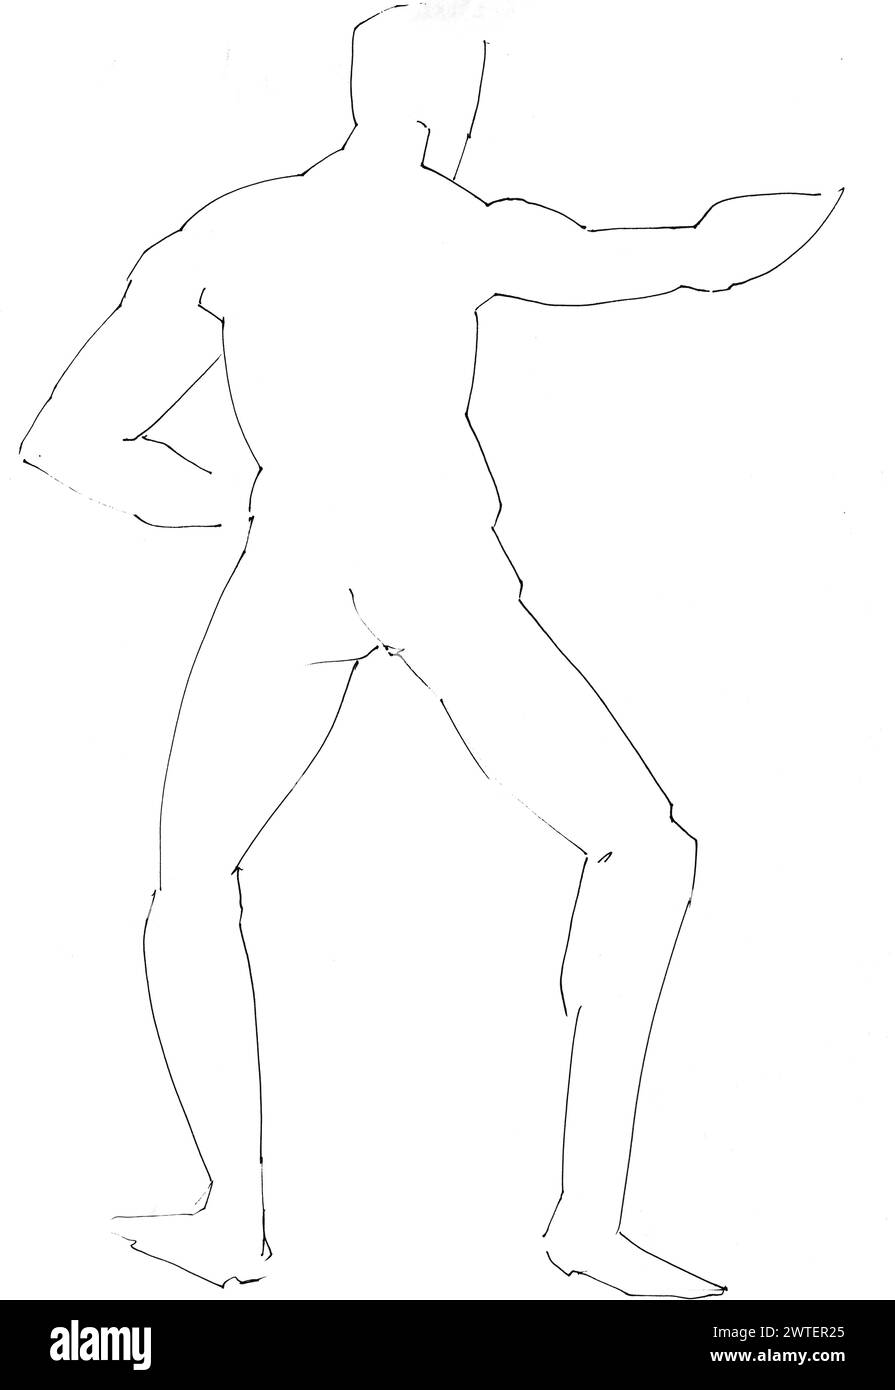 training sketch of male nude model from back in karate pose, hand-drawn in black ink on white paper Stock Photo